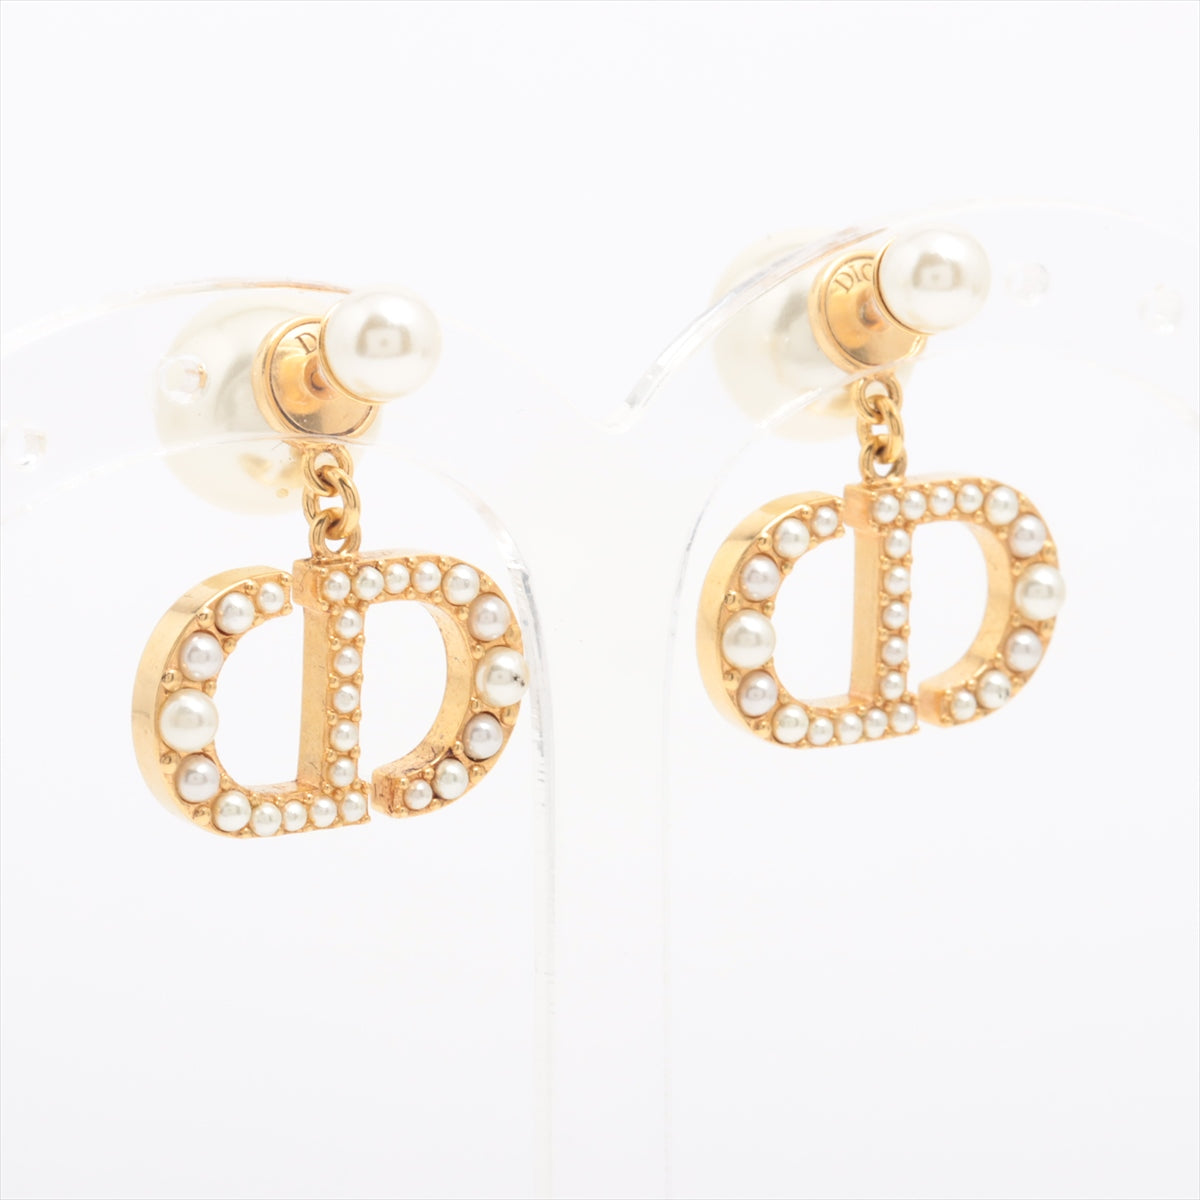 DIOR Dior Tribales  DIOR Tribal Piercing jewelry (for both ears) GP x Imitation pearl Gold